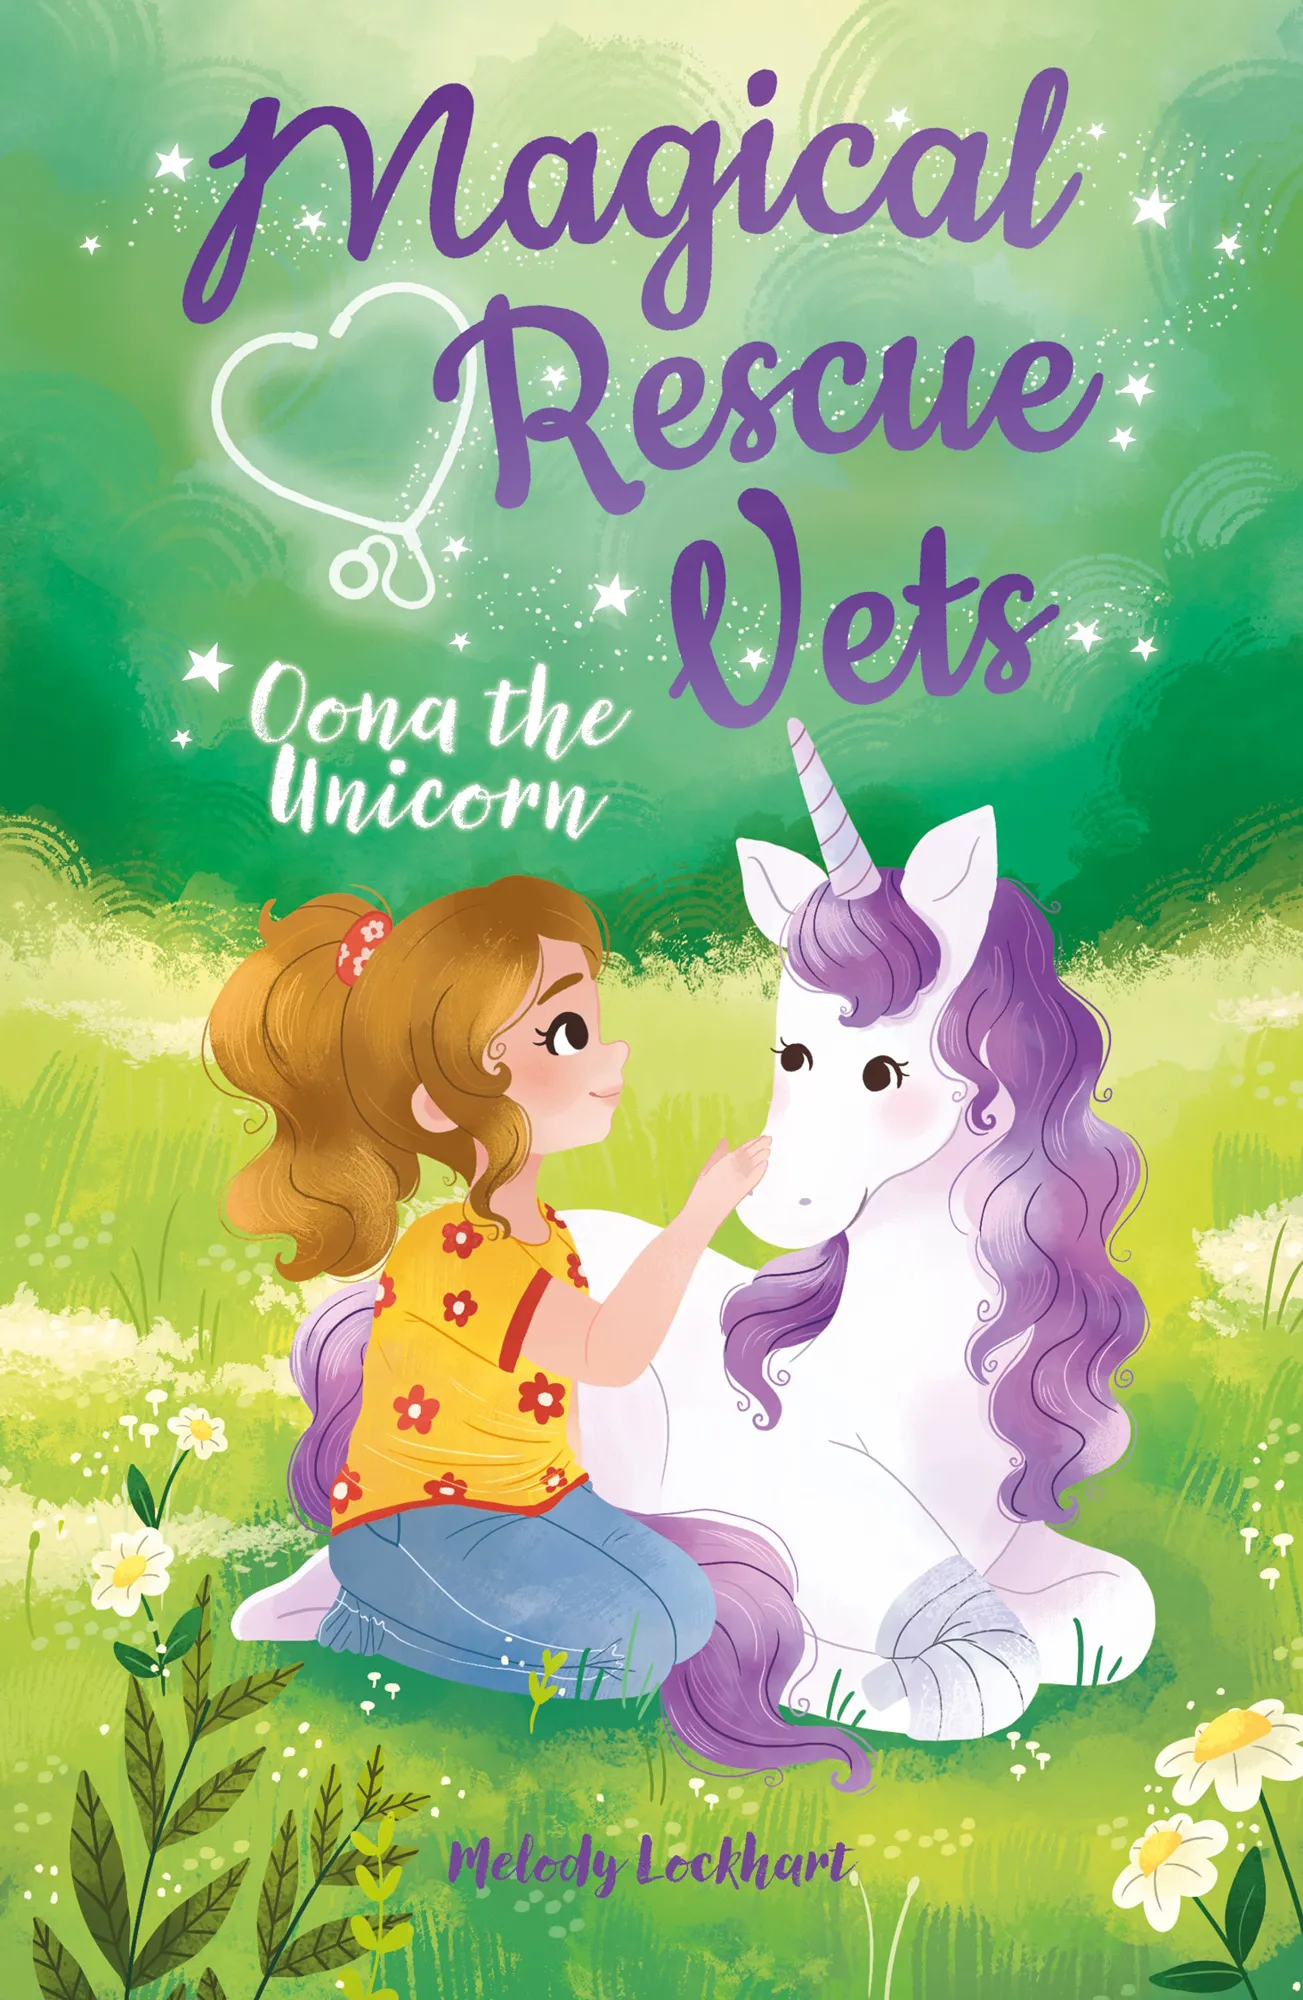 Oona the Unicorn (Magical Rescue Vets #1)